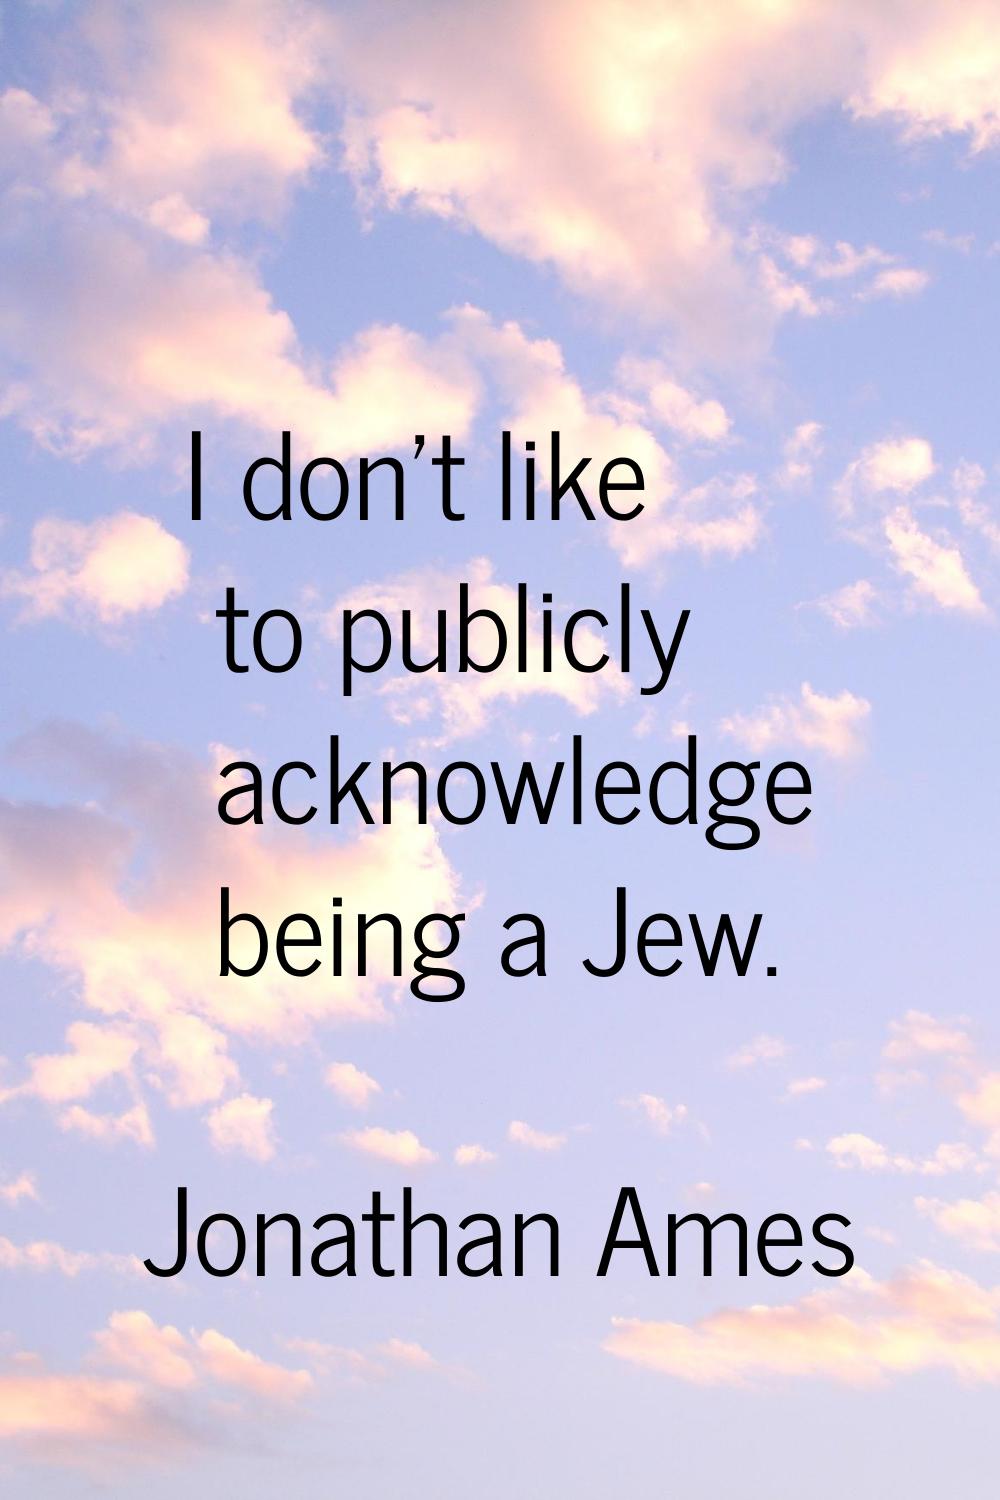 I don't like to publicly acknowledge being a Jew.